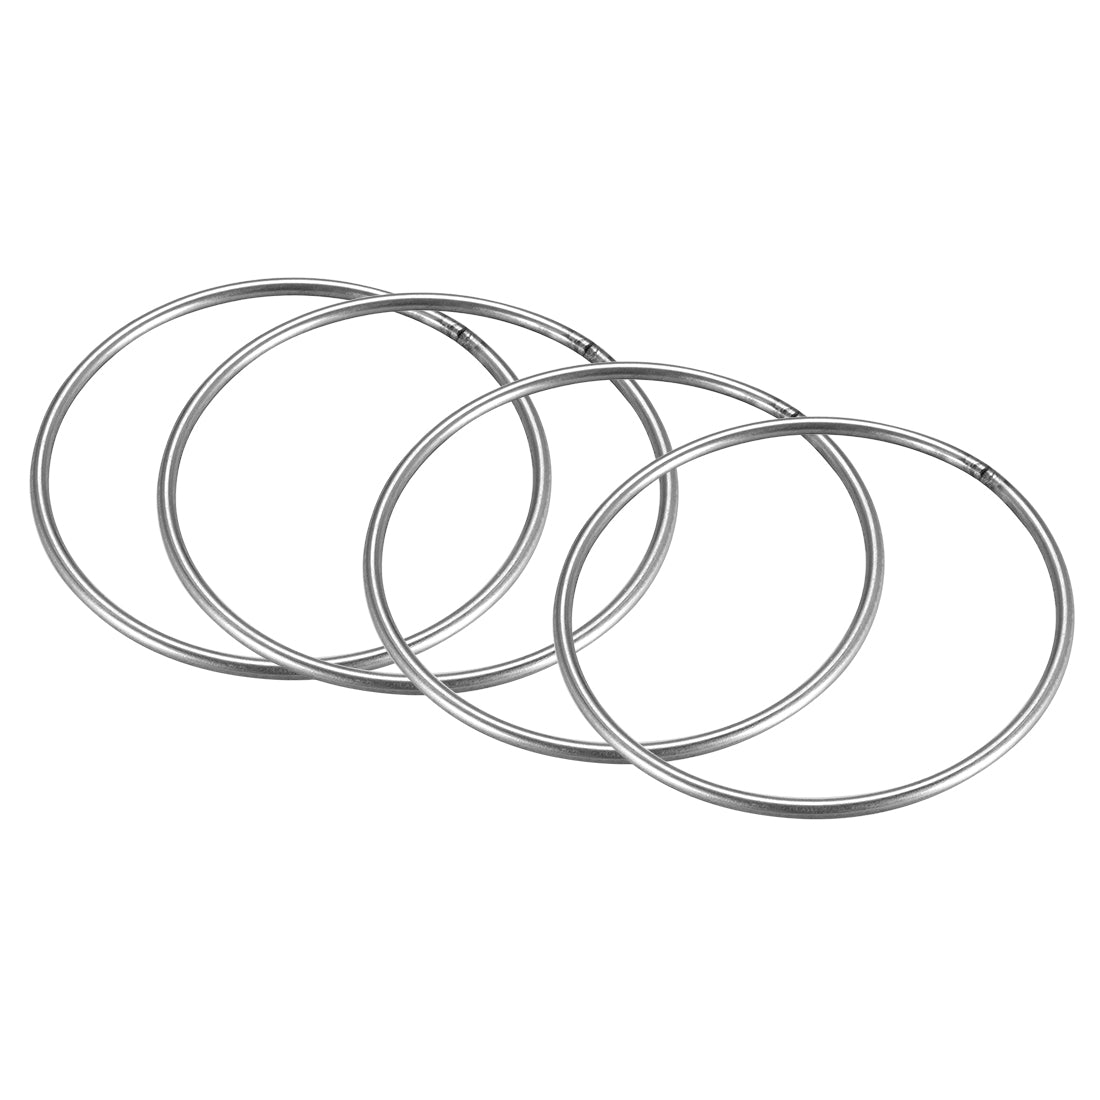 Welded O Ring 80 3mm Strapping Round Rings 201 Stainless Steel 4pcs ...